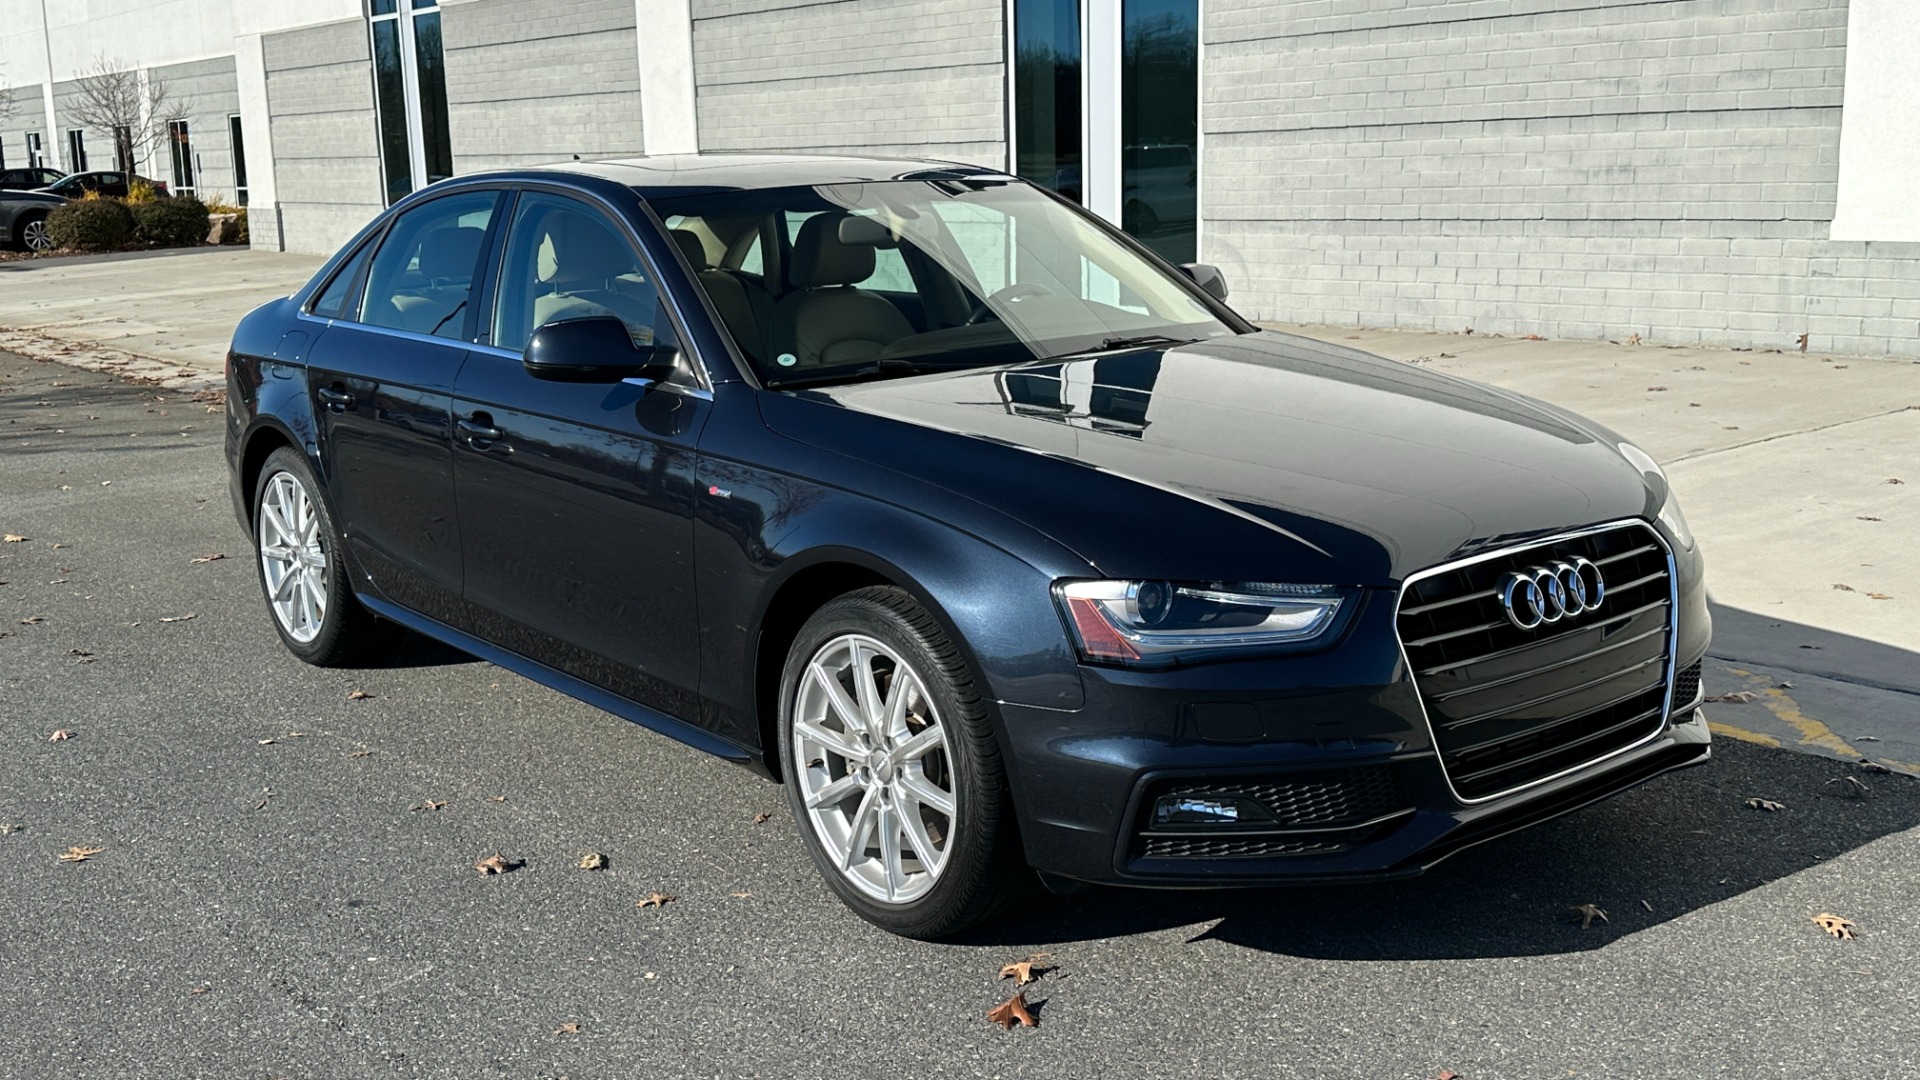 Used 2014 Audi A4 PREMIUM PLUS / NAVIGATION PLUS / BLINDSPOT ASSIST / LEATHER / SUNROOF for sale $21,900 at Formula Imports in Charlotte NC 28227 7